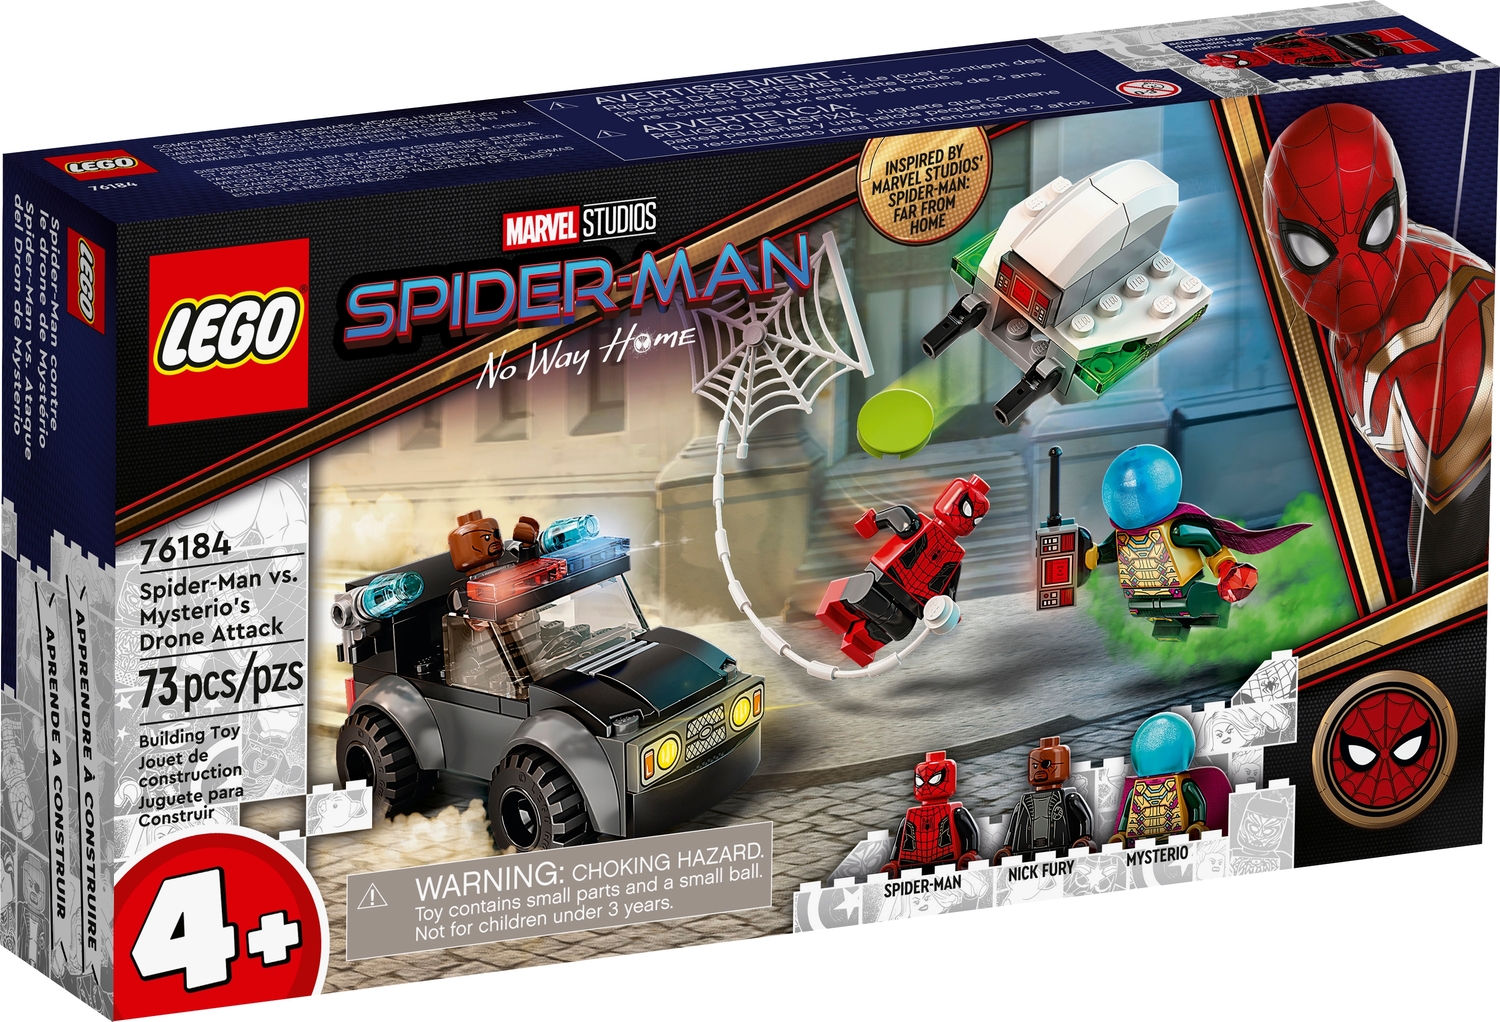 LEGO Spider-Man: Spider-Man vs. Mysterio's Drone Attack – Awesome Toys Gifts